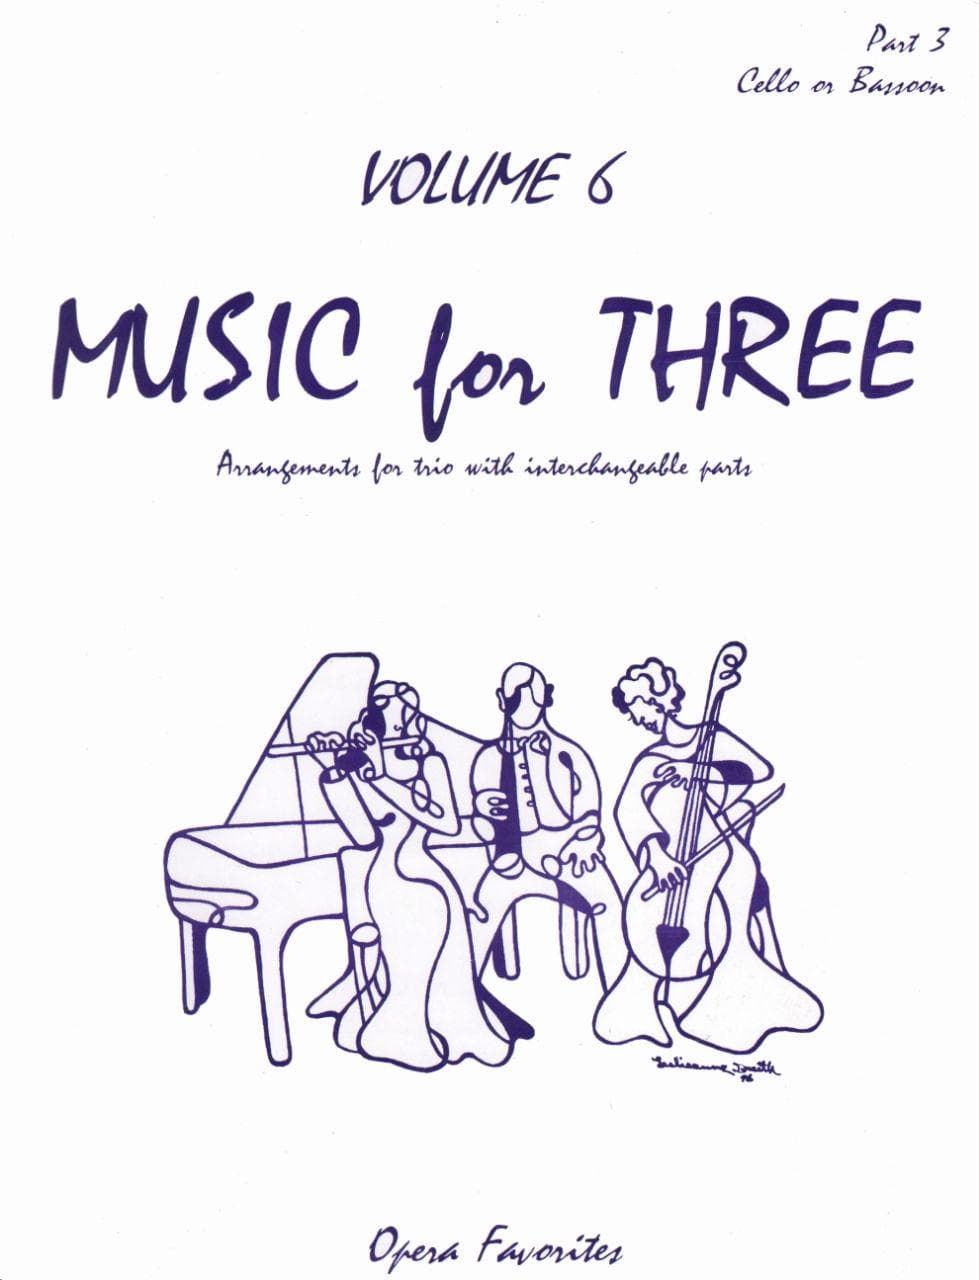 Music for Three Volume 6 Part 3, Cello or Bassoon Published by Last Resort Music